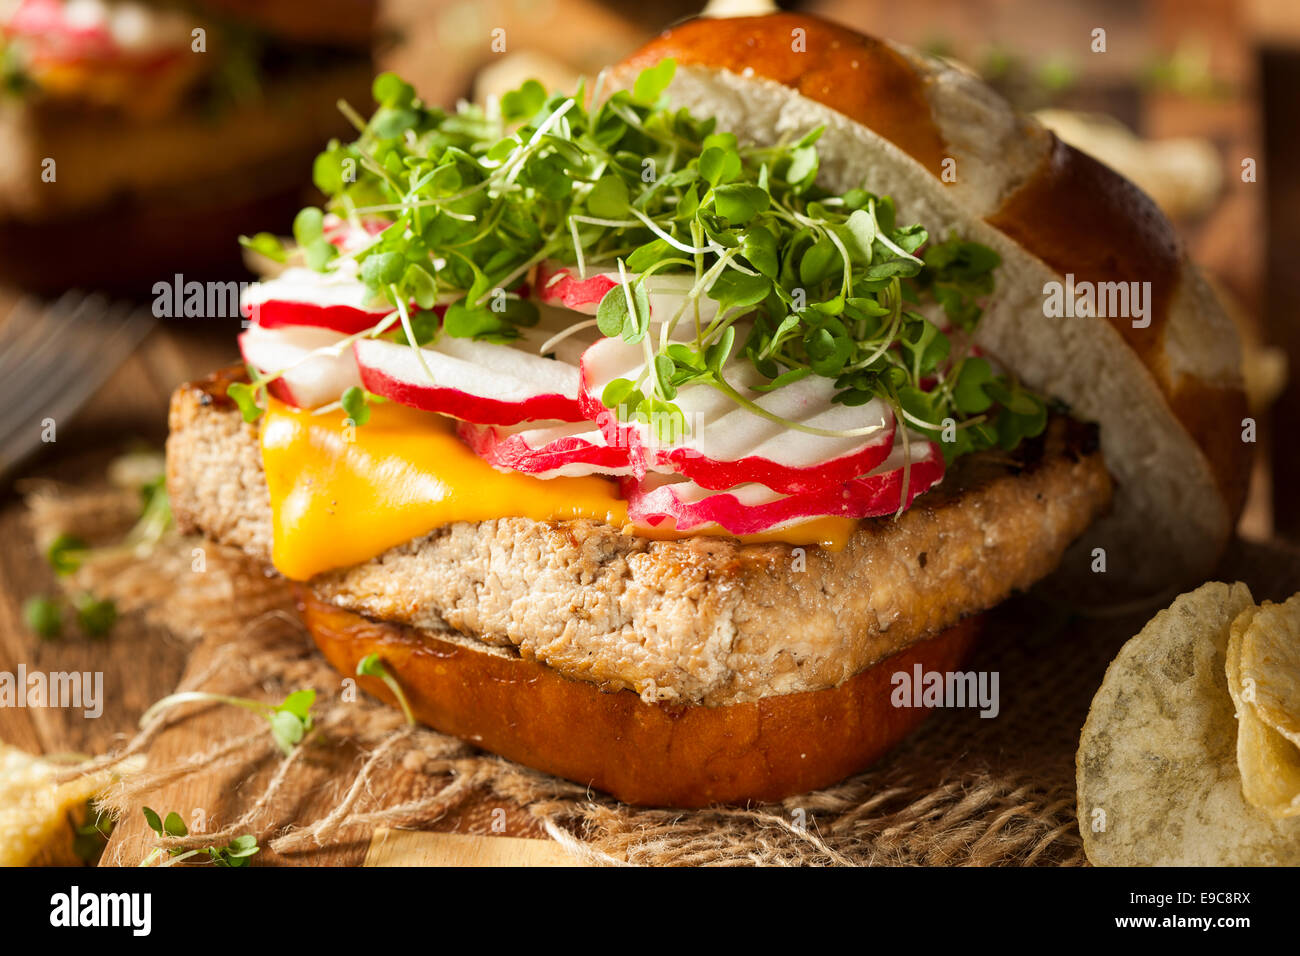 Homemade Vegetarian Soy Tofu Burger with Chips Stock Photo